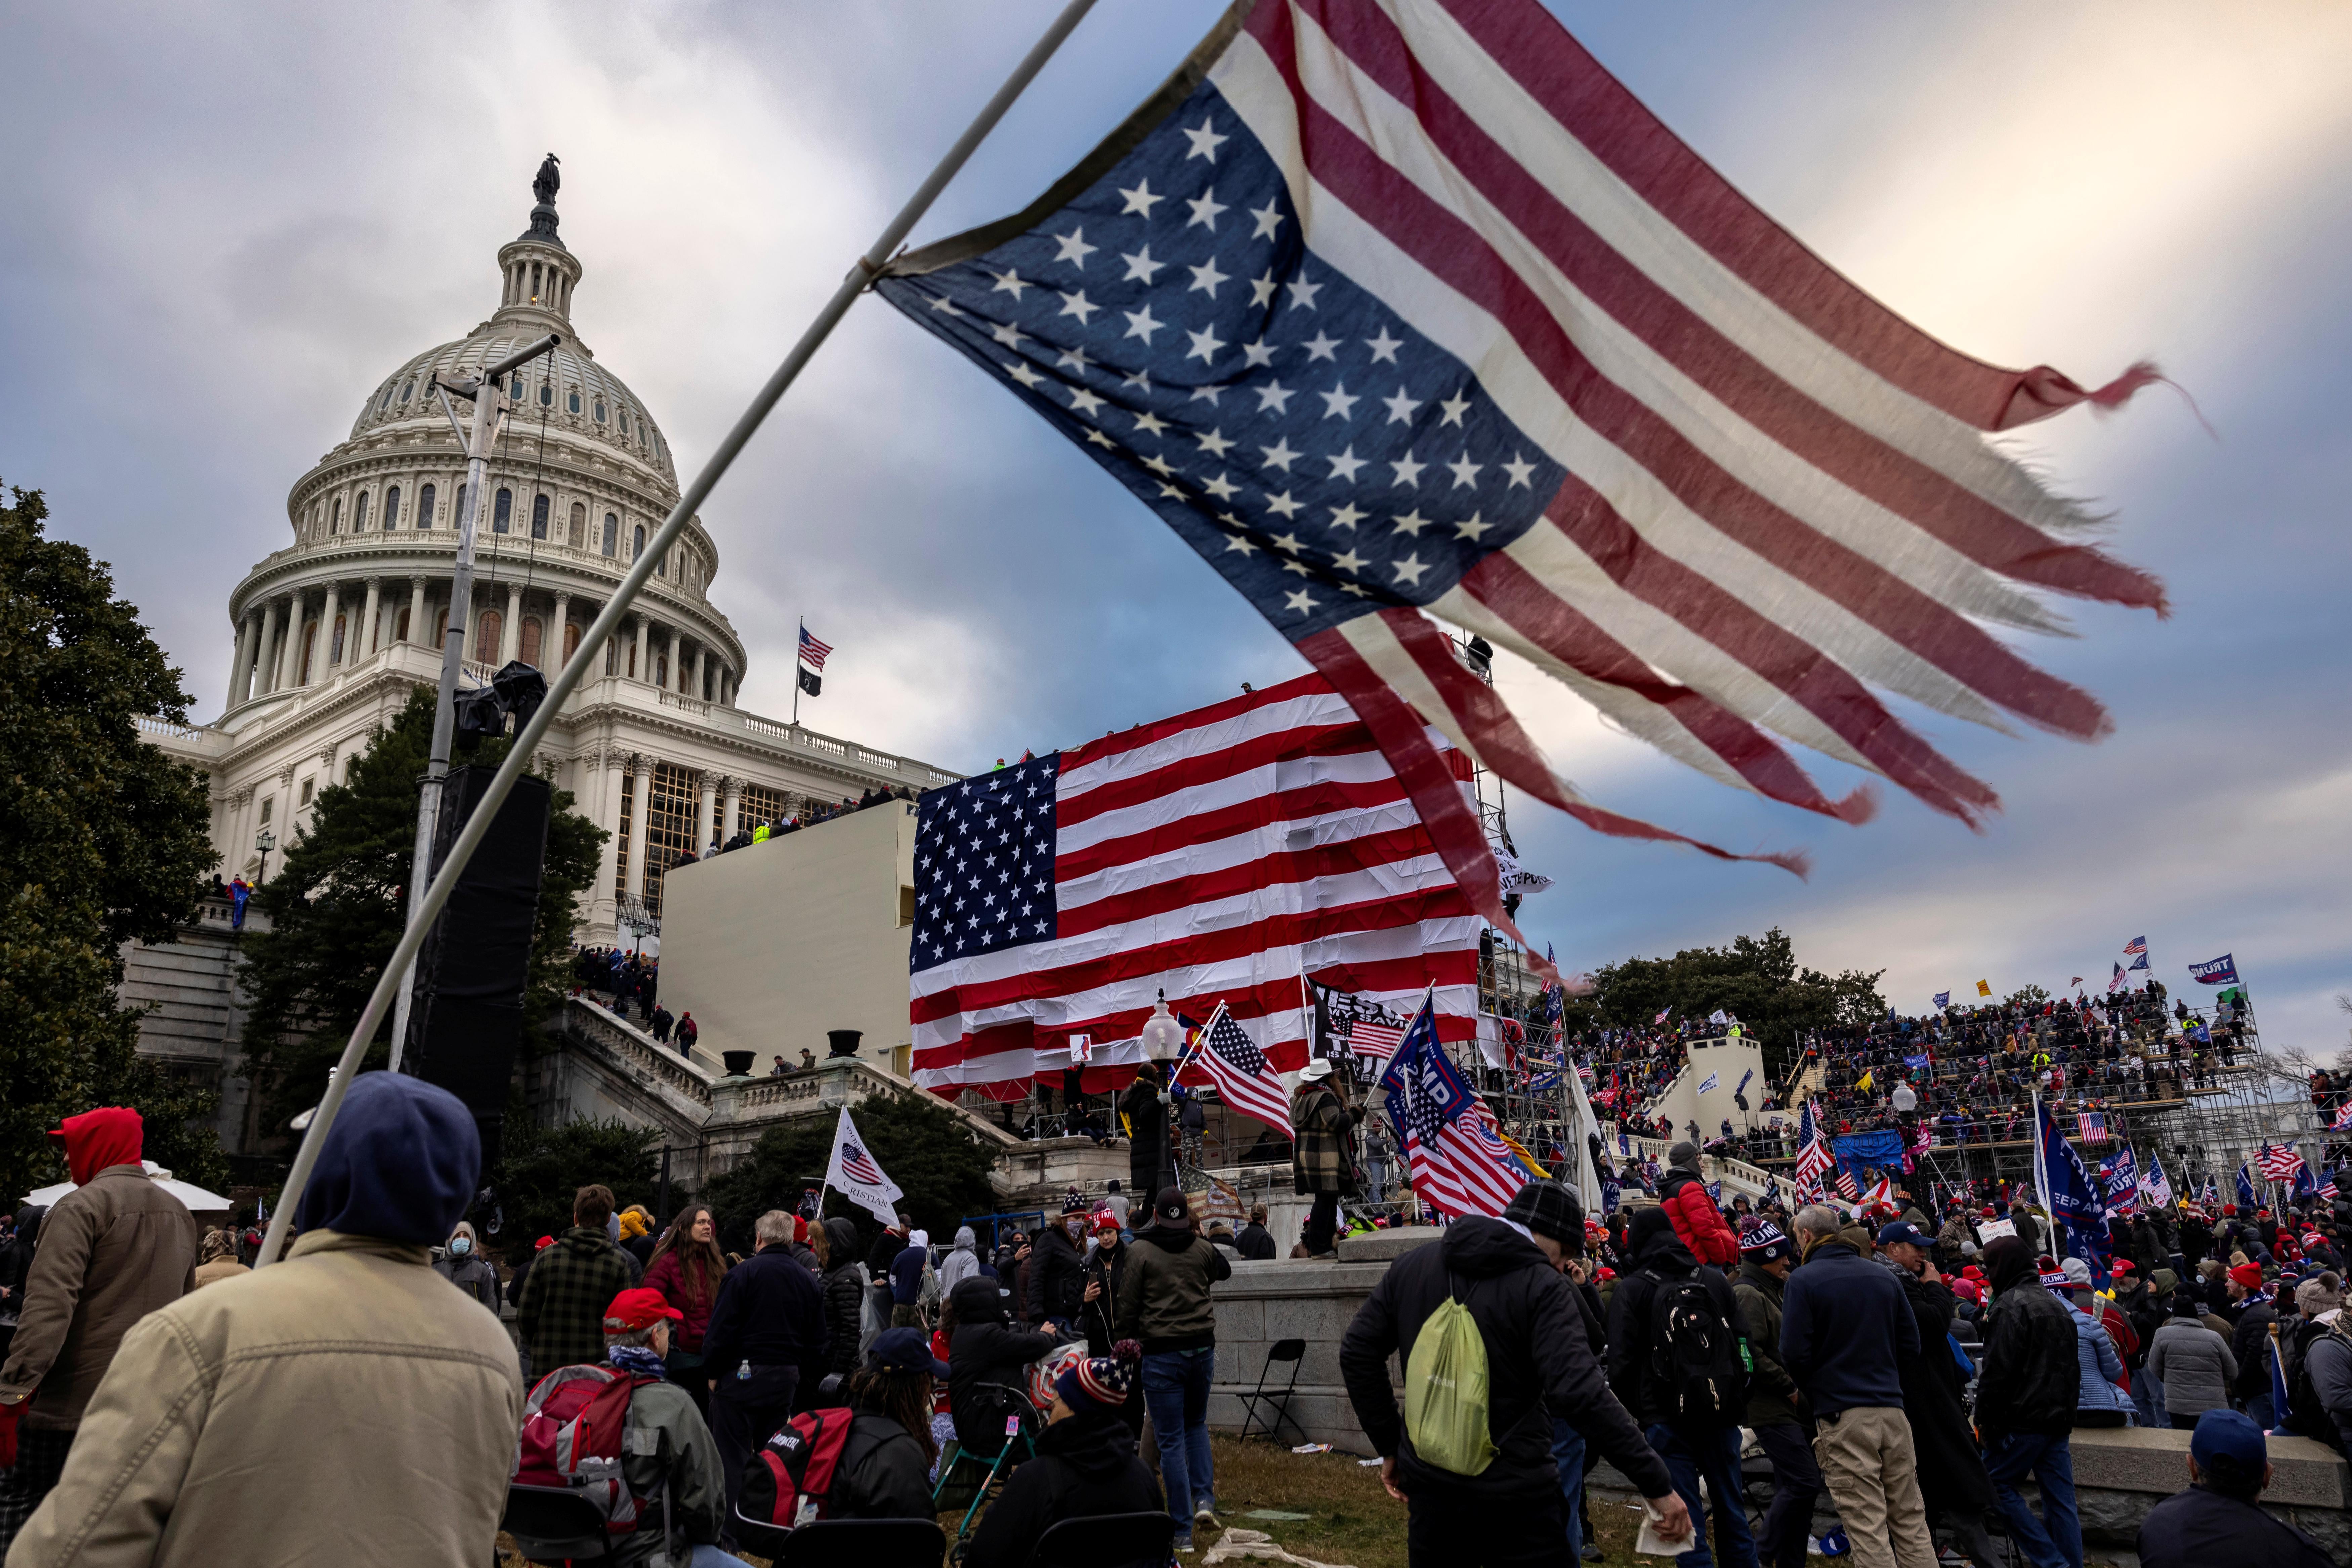 A frayed upside-down American flag flies in front of Trump supporters massed on the Capitol steps.